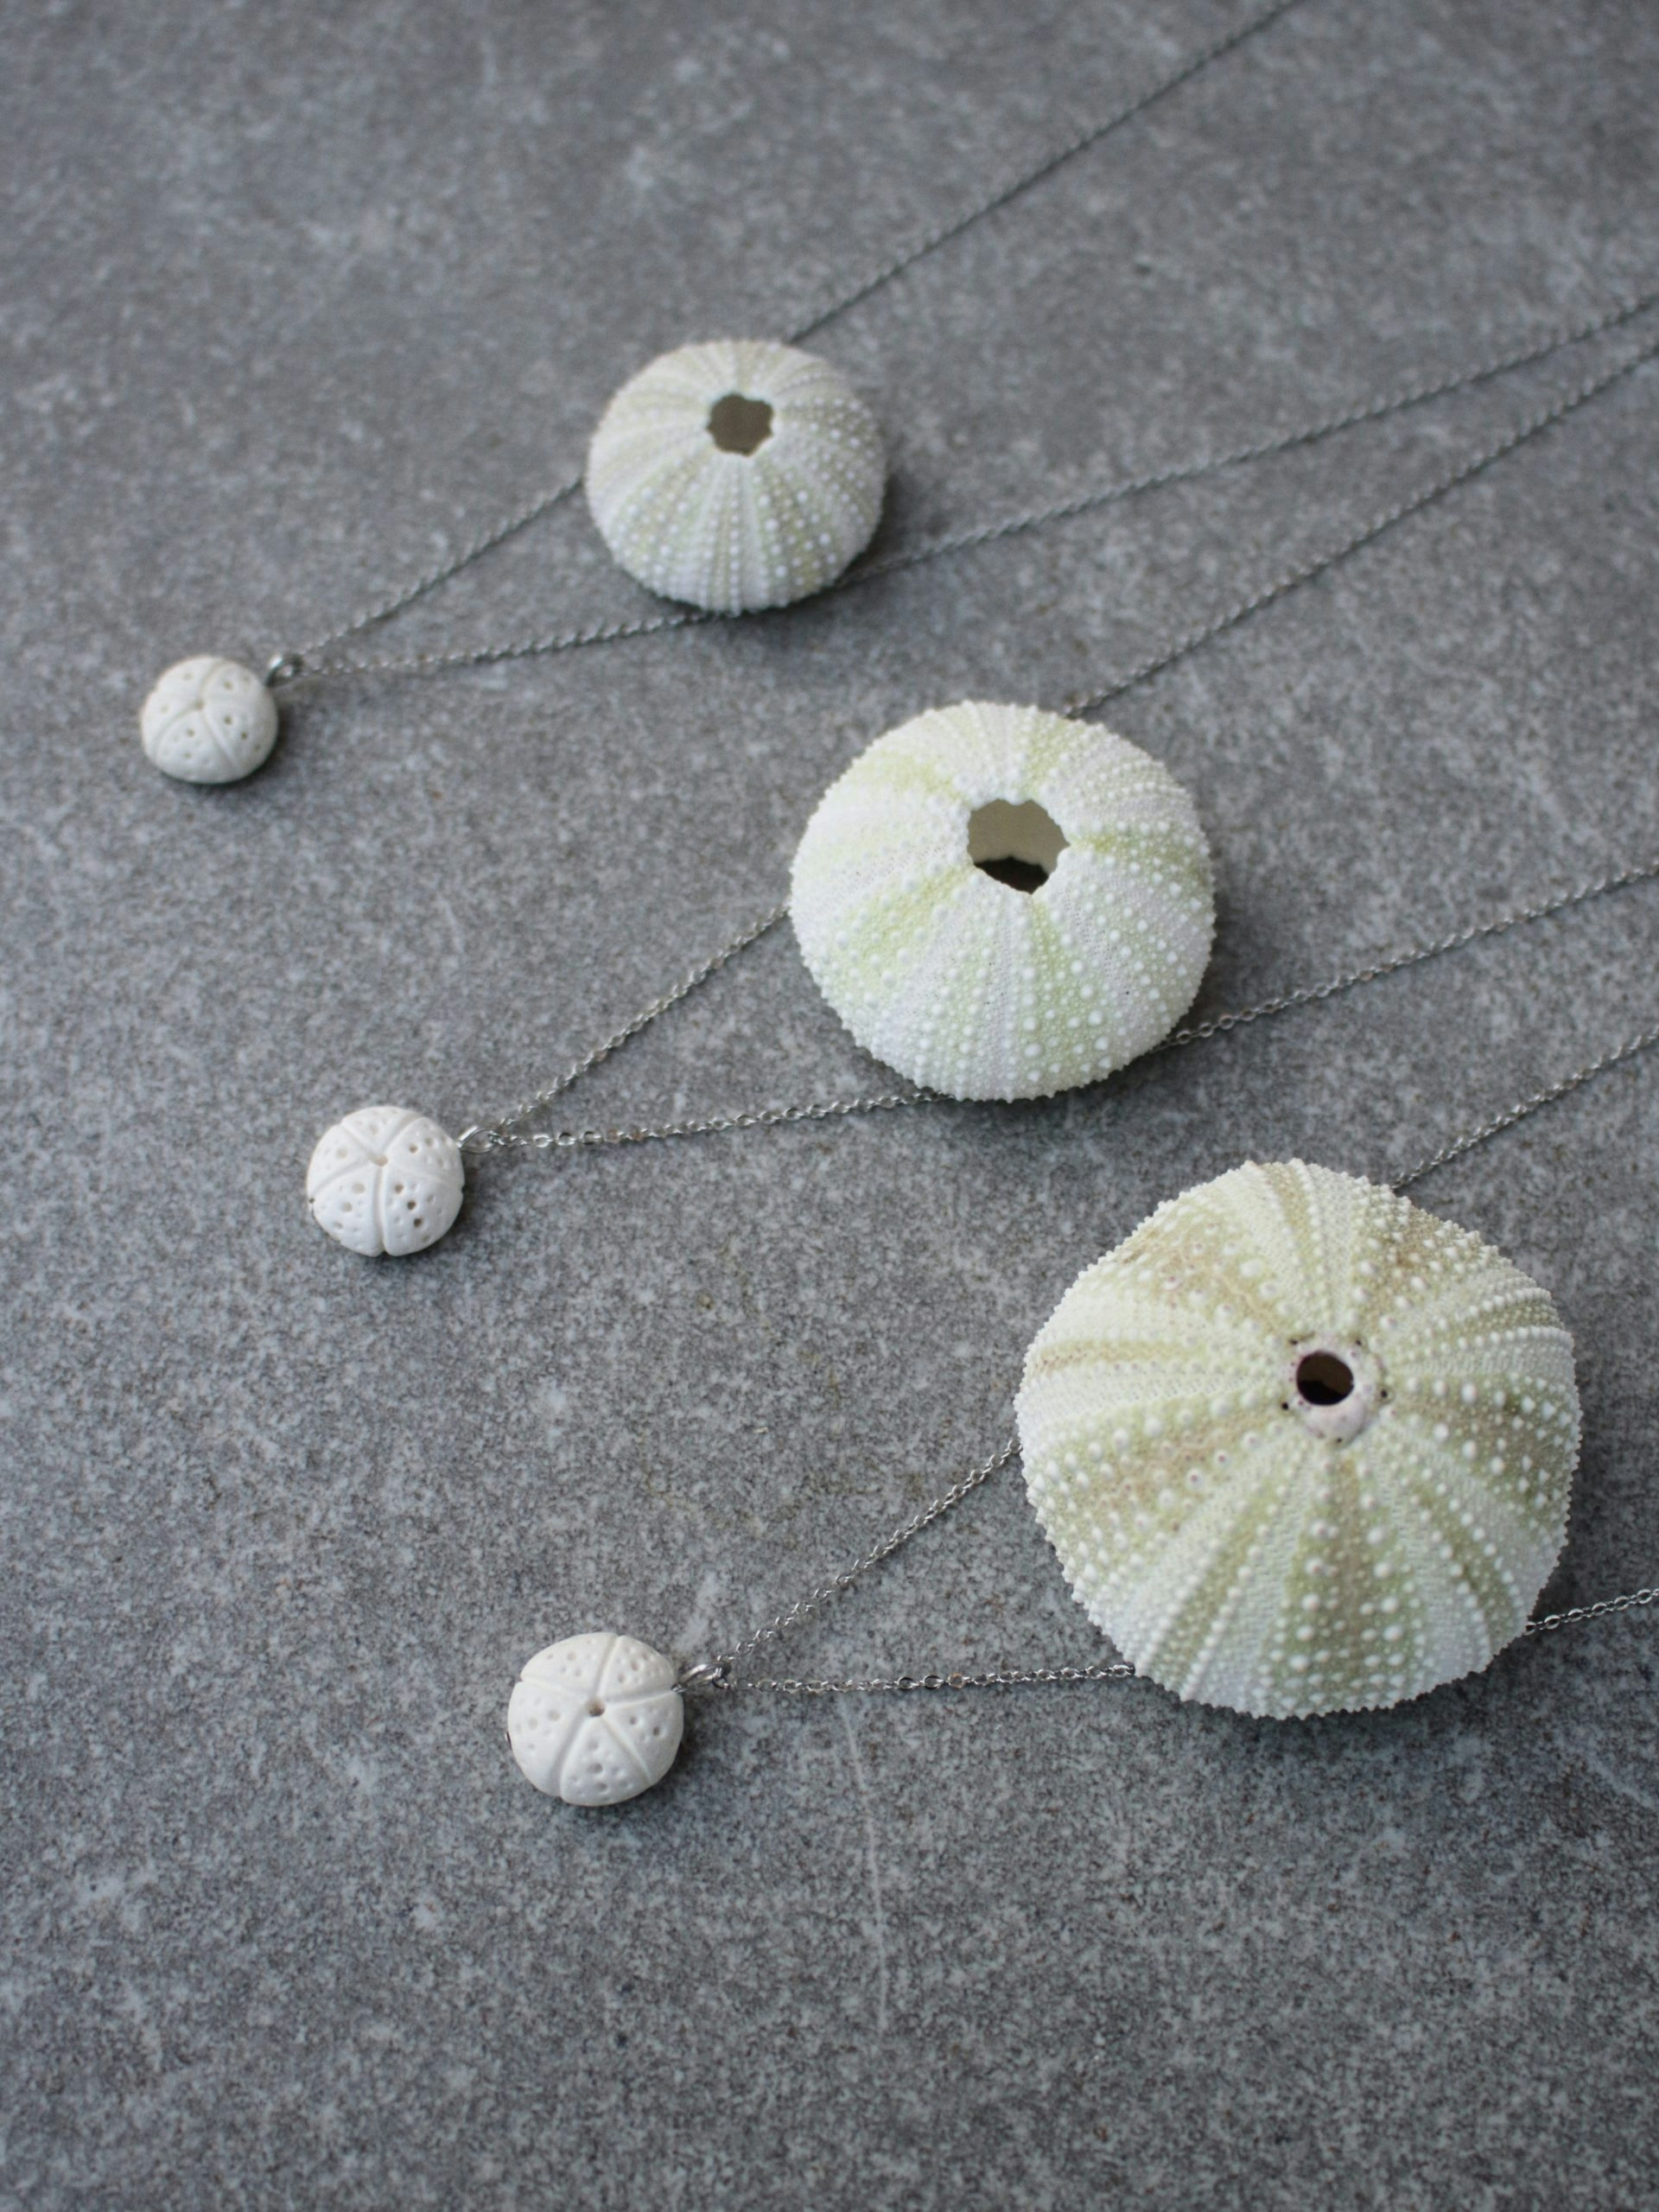 Hand made sea urchin necklaces out of porcelain.